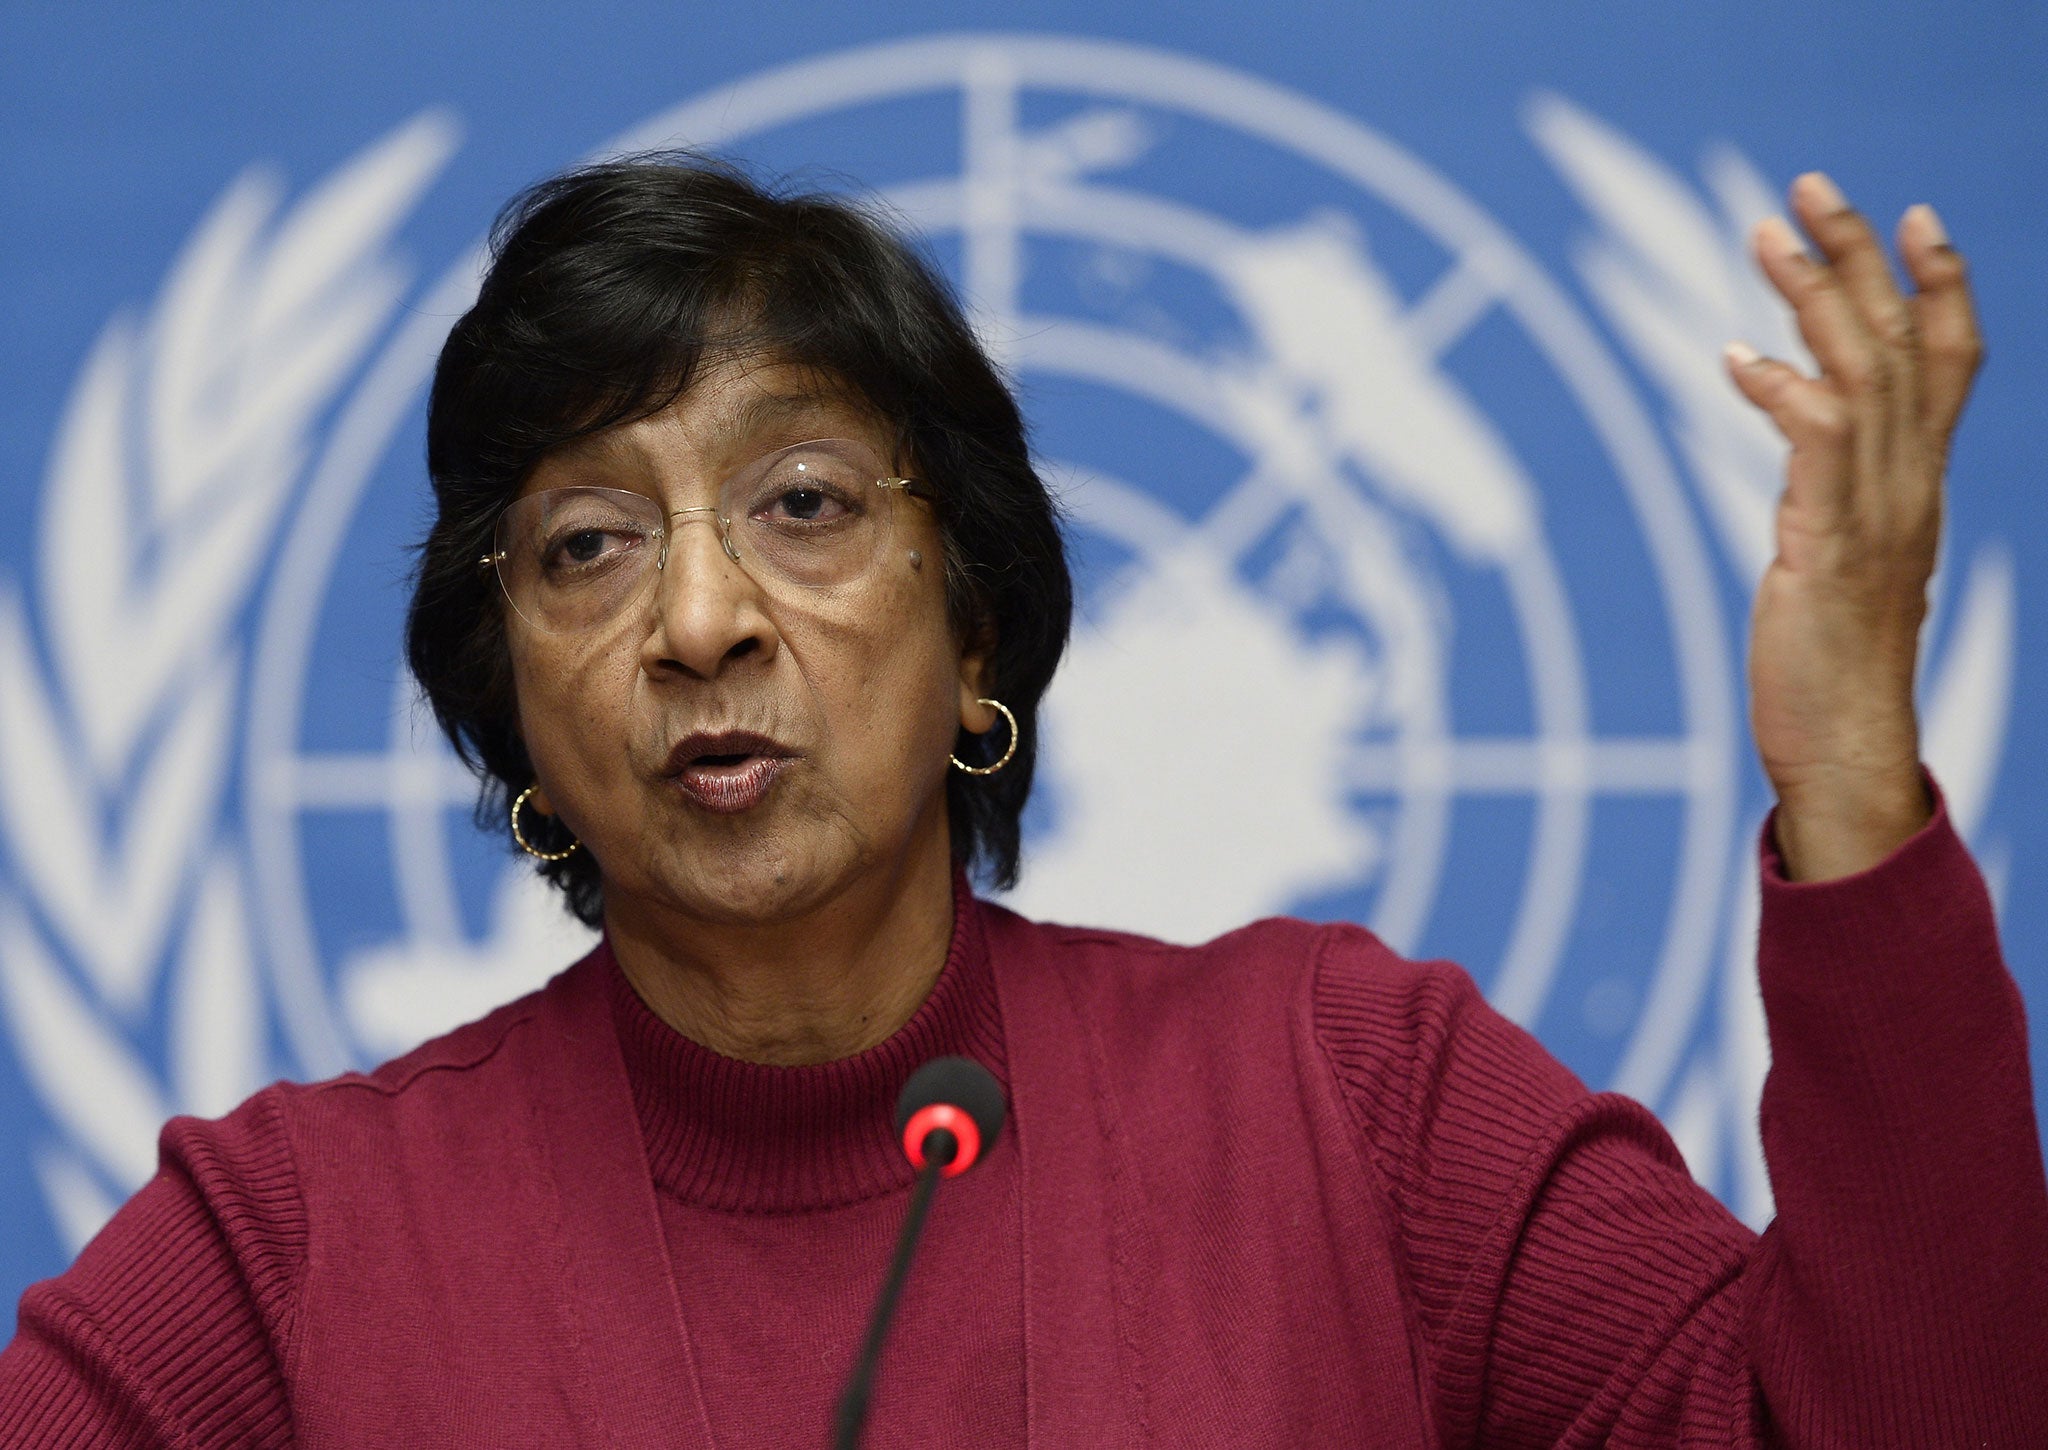 UN High Commissioner for Human Rights Navi Pillay gives a press conference on December 2, 2013 at the United Nations offices in Geneva.